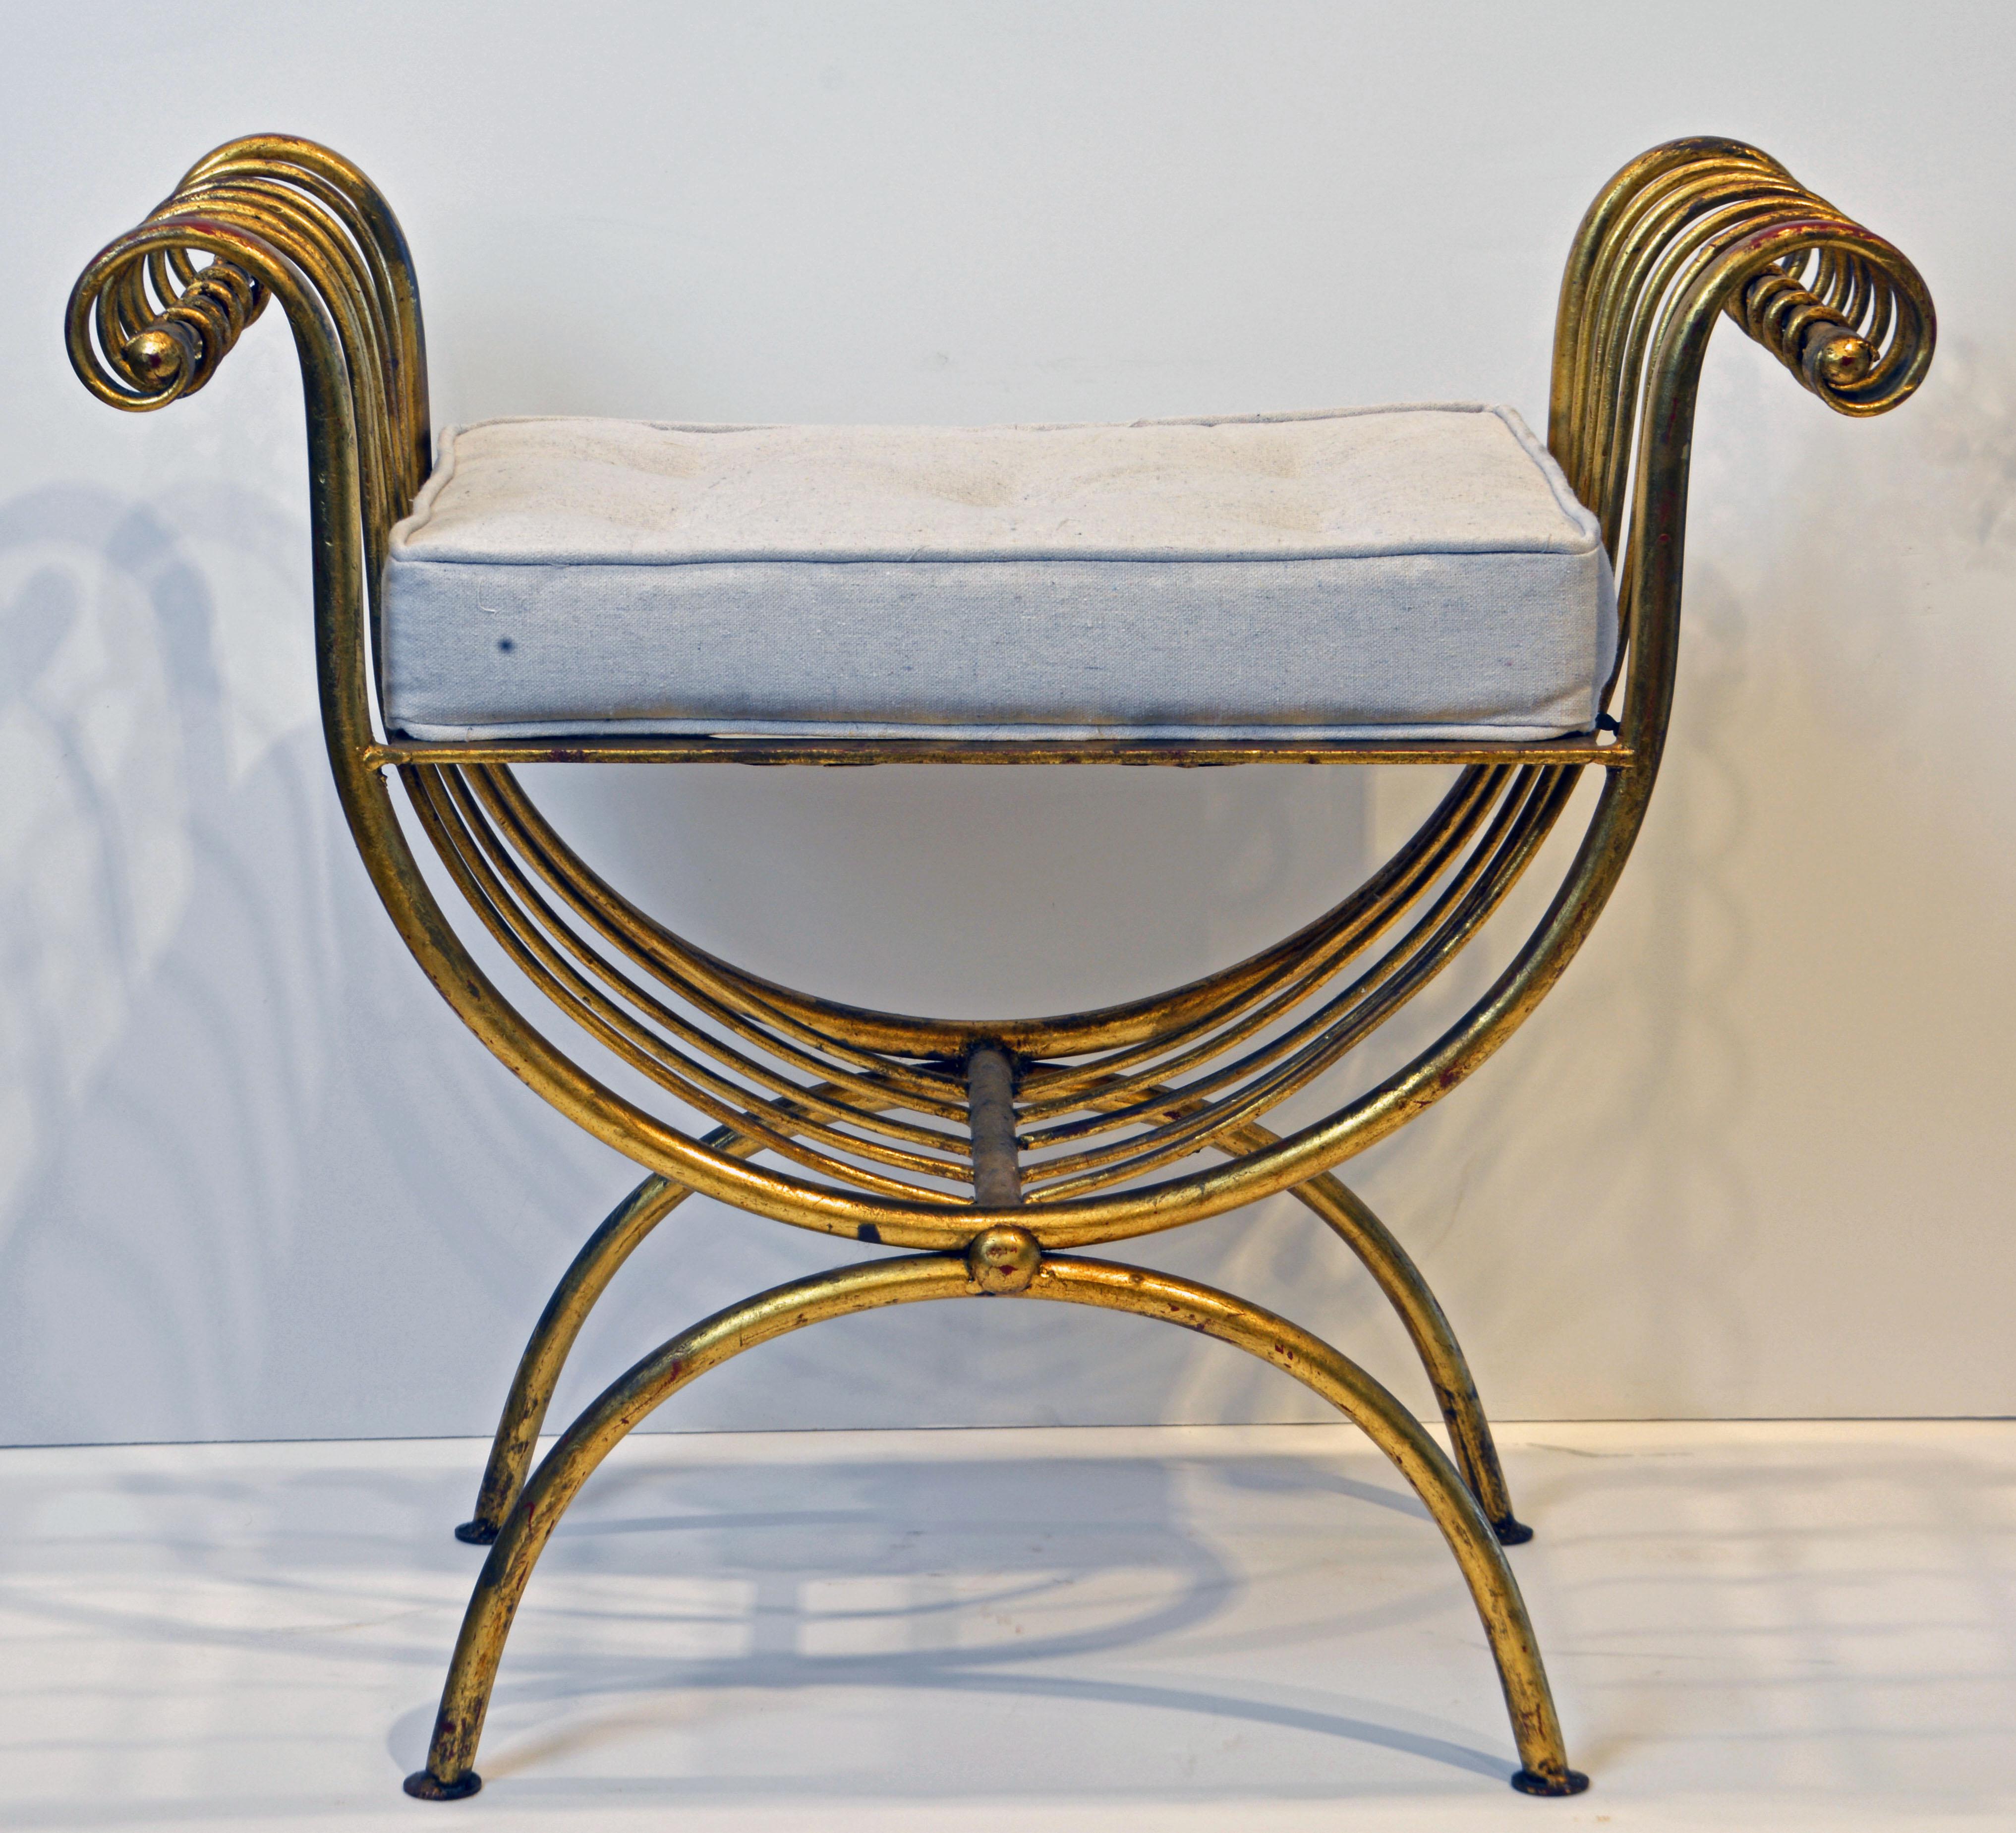 A great bench in the neoclassical Curule form. Beautiful patina to the gilt. New off white cushion.